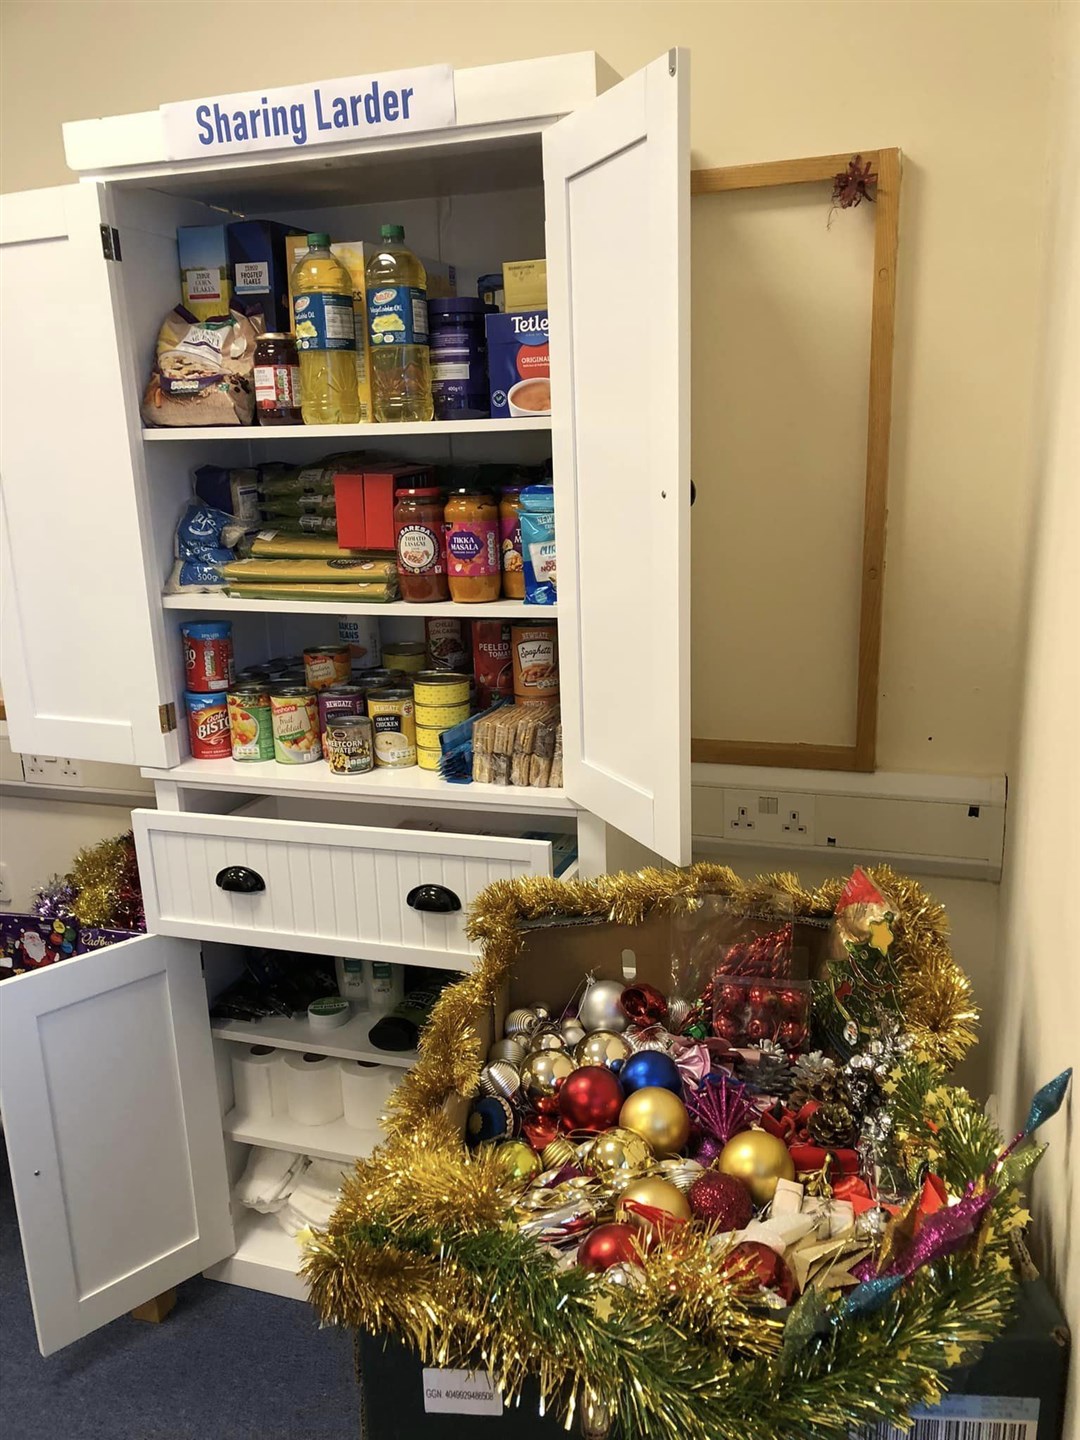 The sharing larder is found at the community centre. Picture: Strathpeffer Community Centre